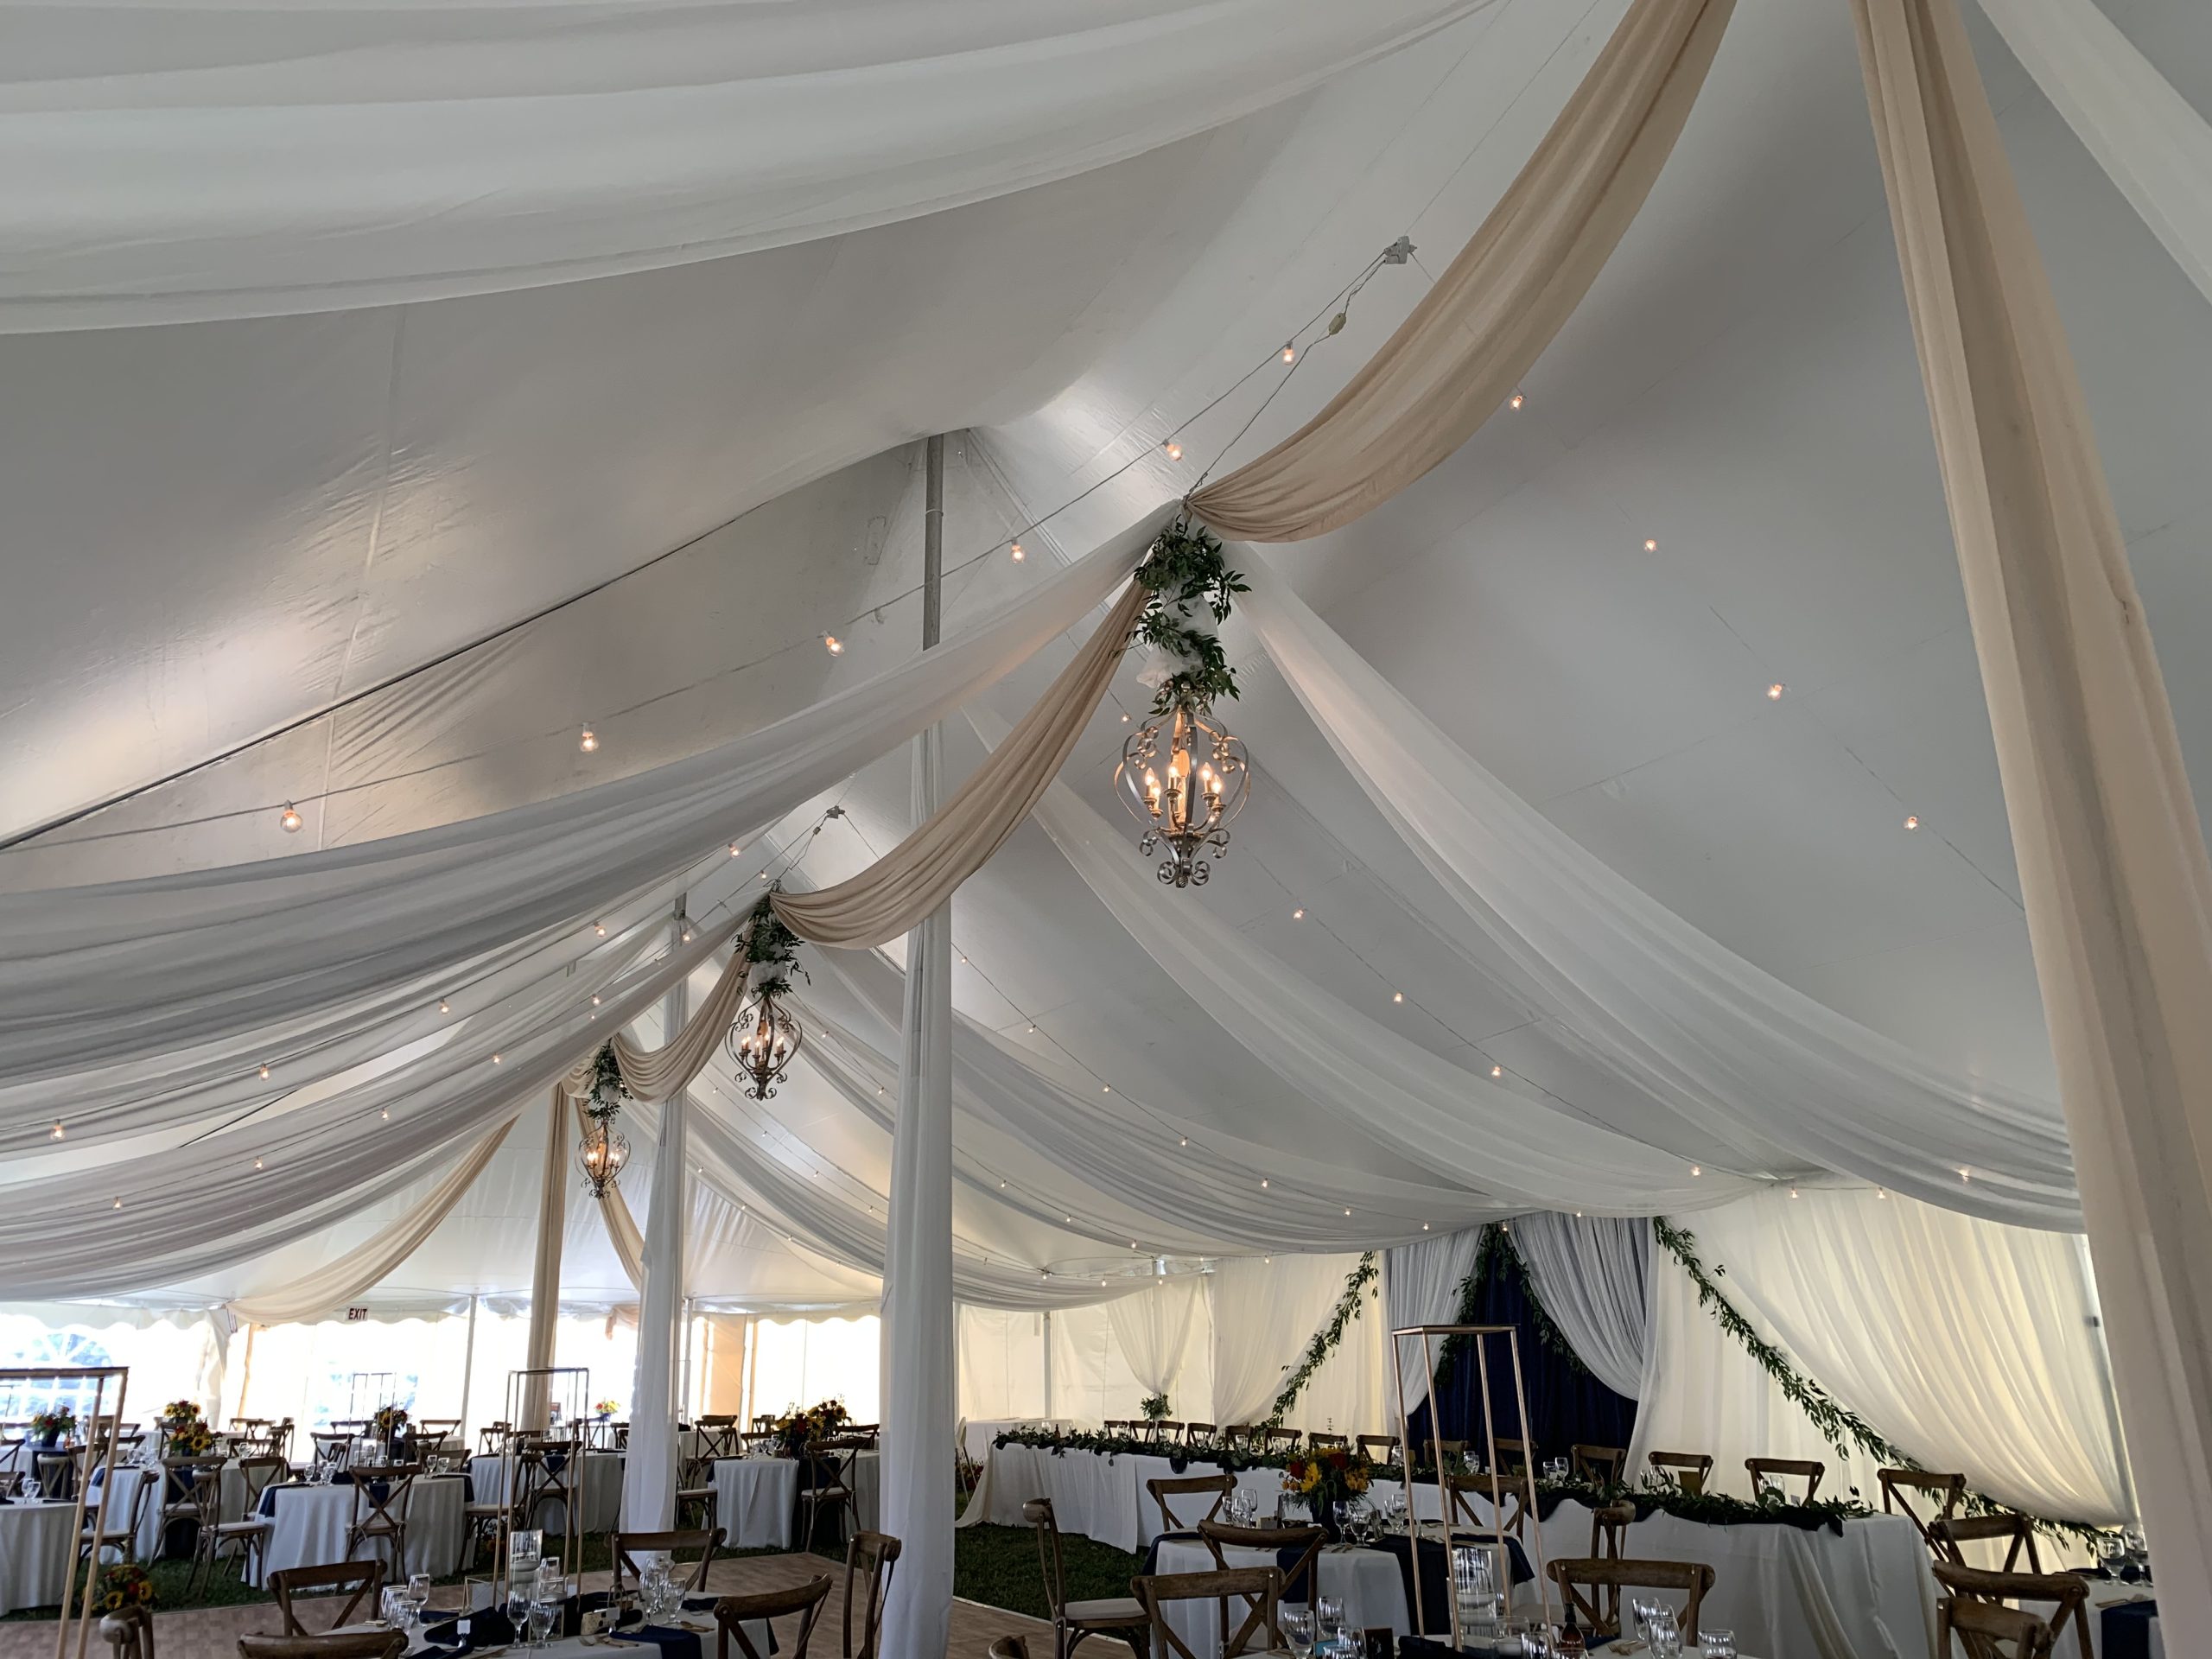 Tent with wedding decorations by devine wedding design in ontario.